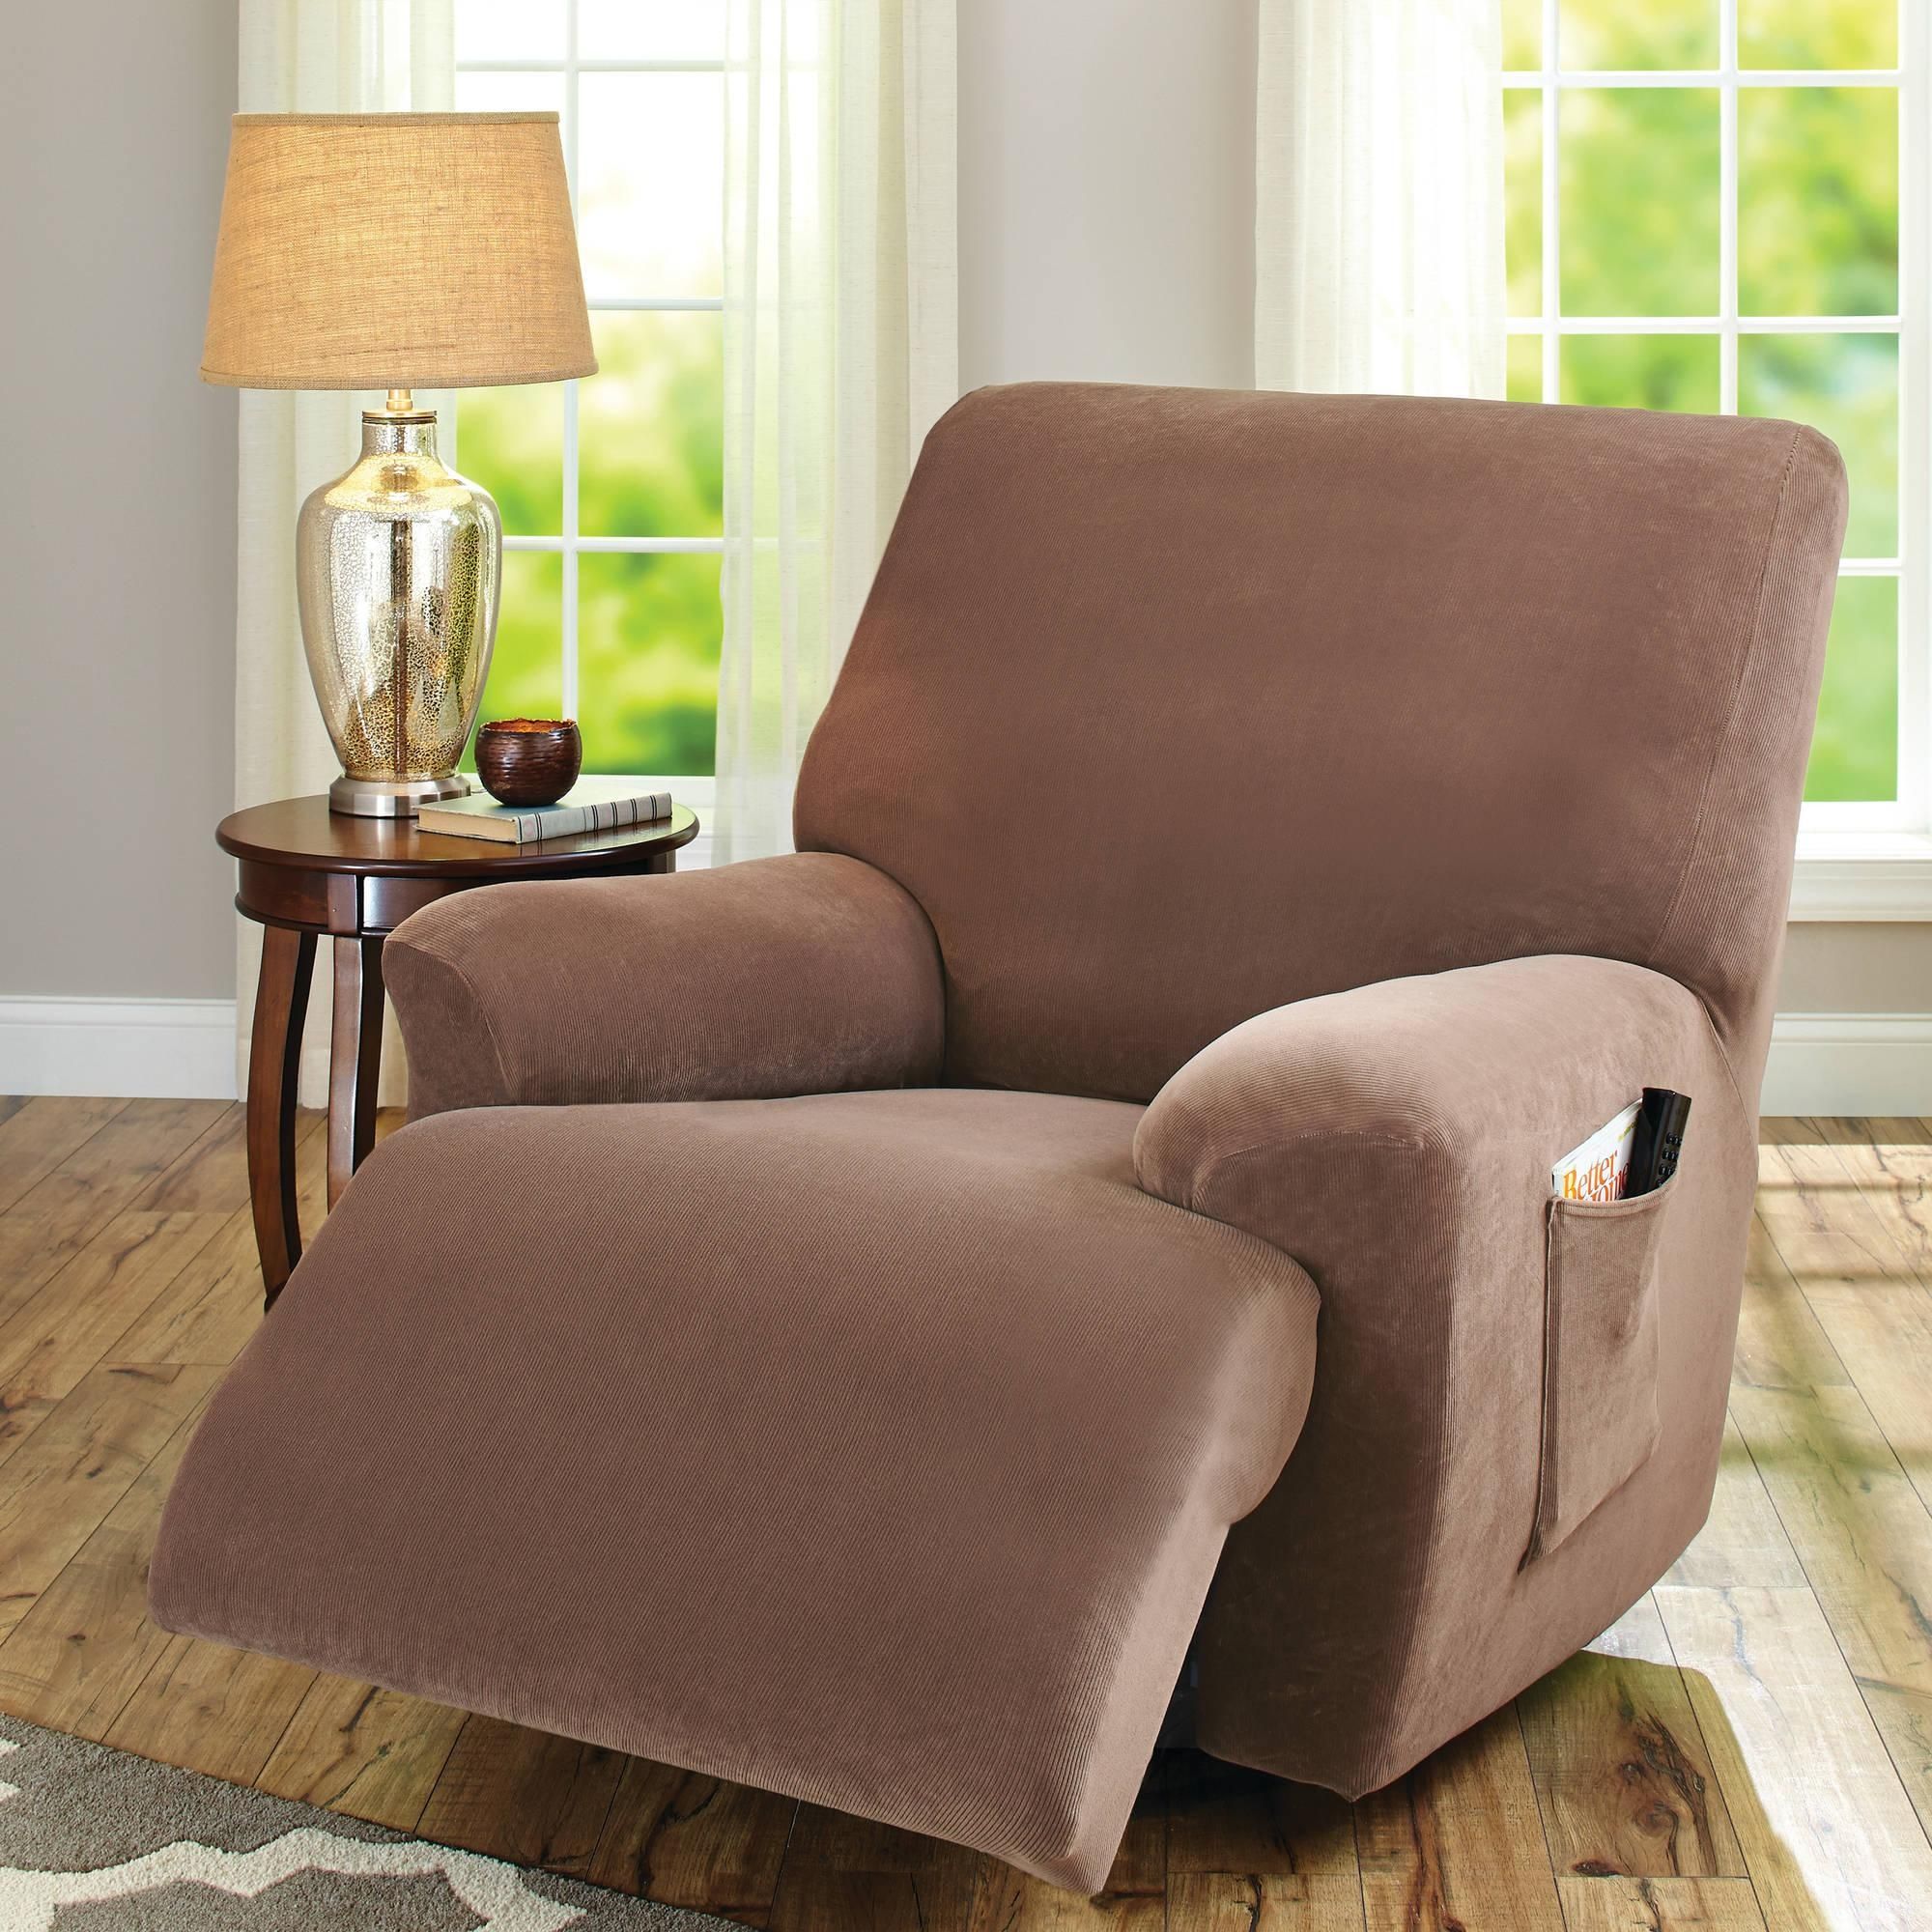 ☆▻ Sofa : 24 Wonderful 3 Seat Recliner Sofa Covers 10810835 Pertaining To Stretch Covers For Recliners (View 5 of 20)